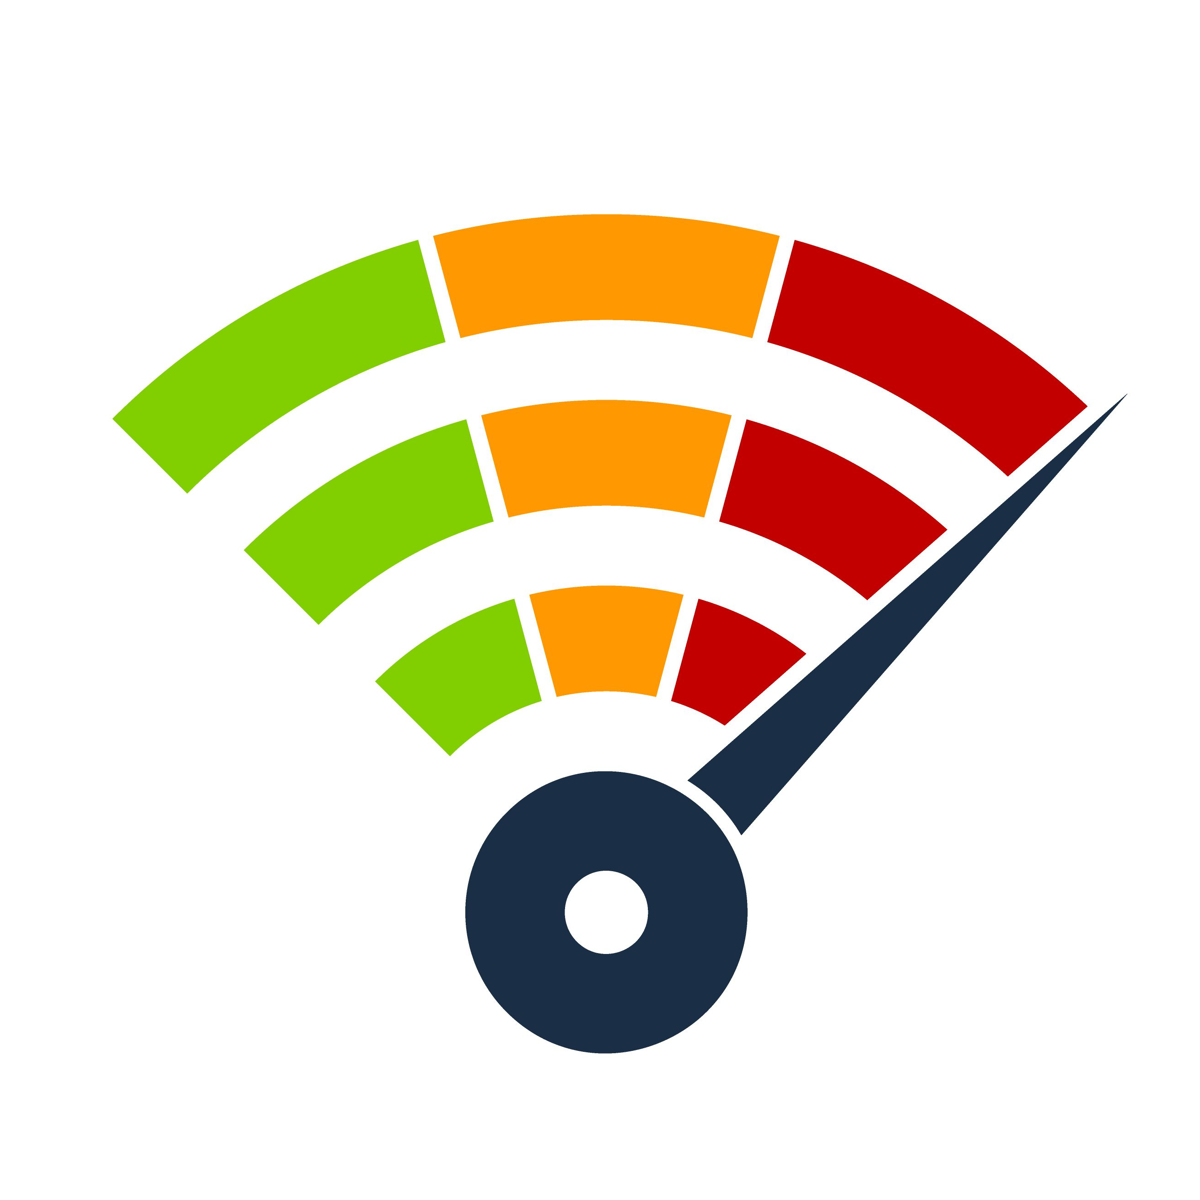 The Wi-Fi symbol with a speed gauge represents fast Wi-Fi solutions for public spaces.